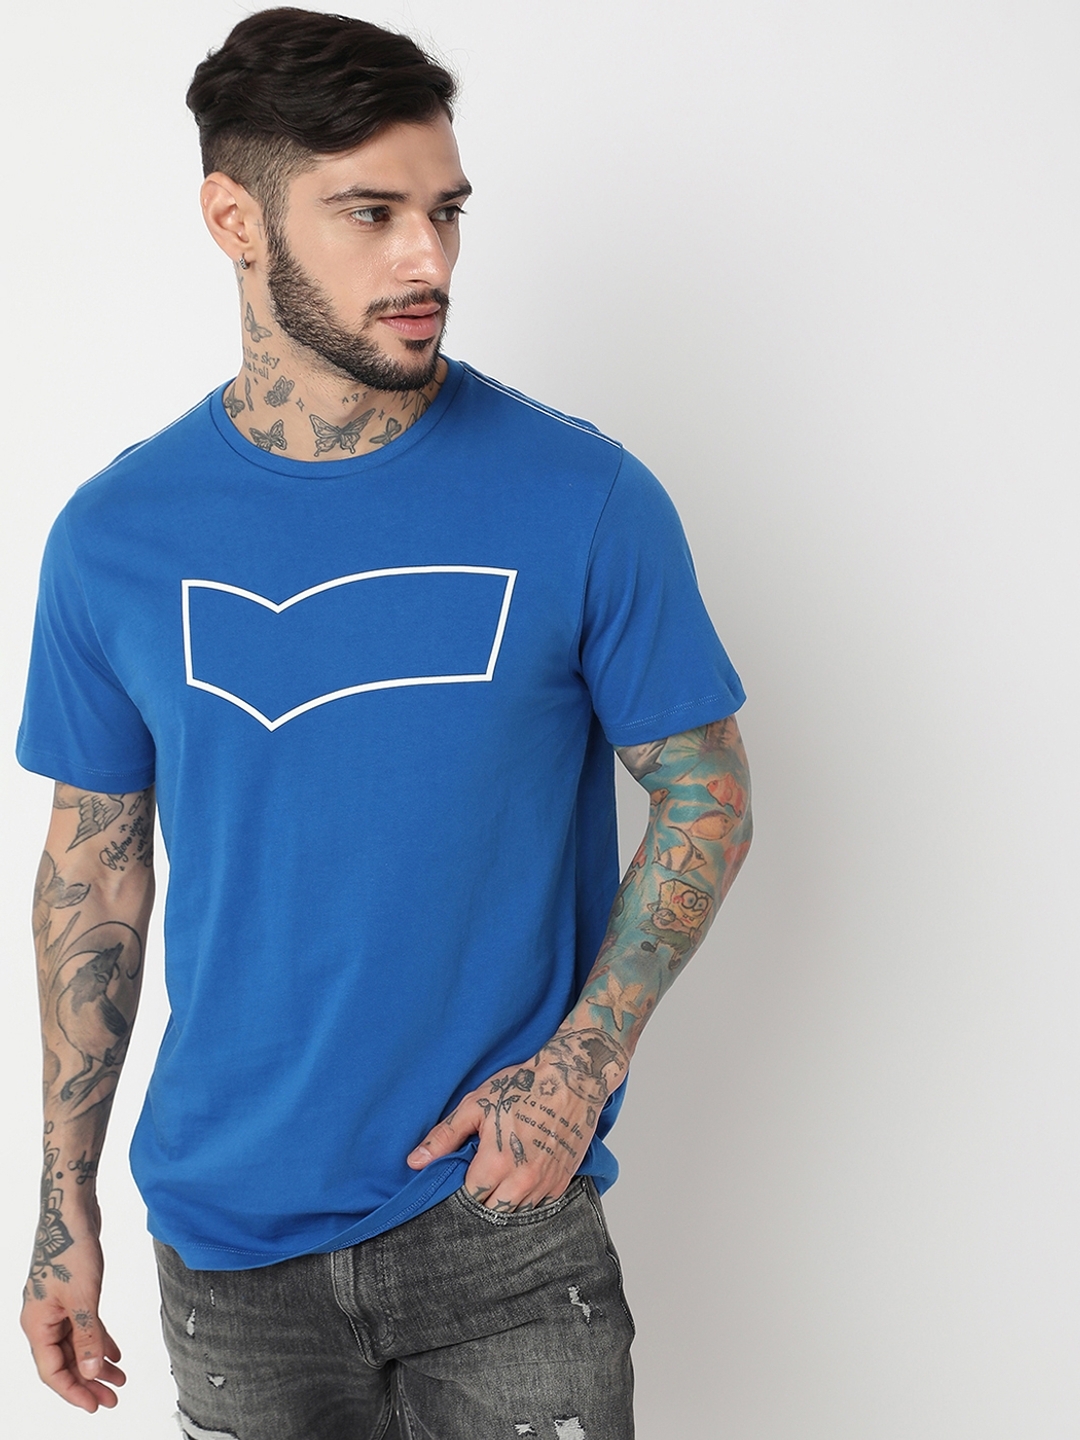 Relaxed Fit Half Sleeve Solid T-Shirt